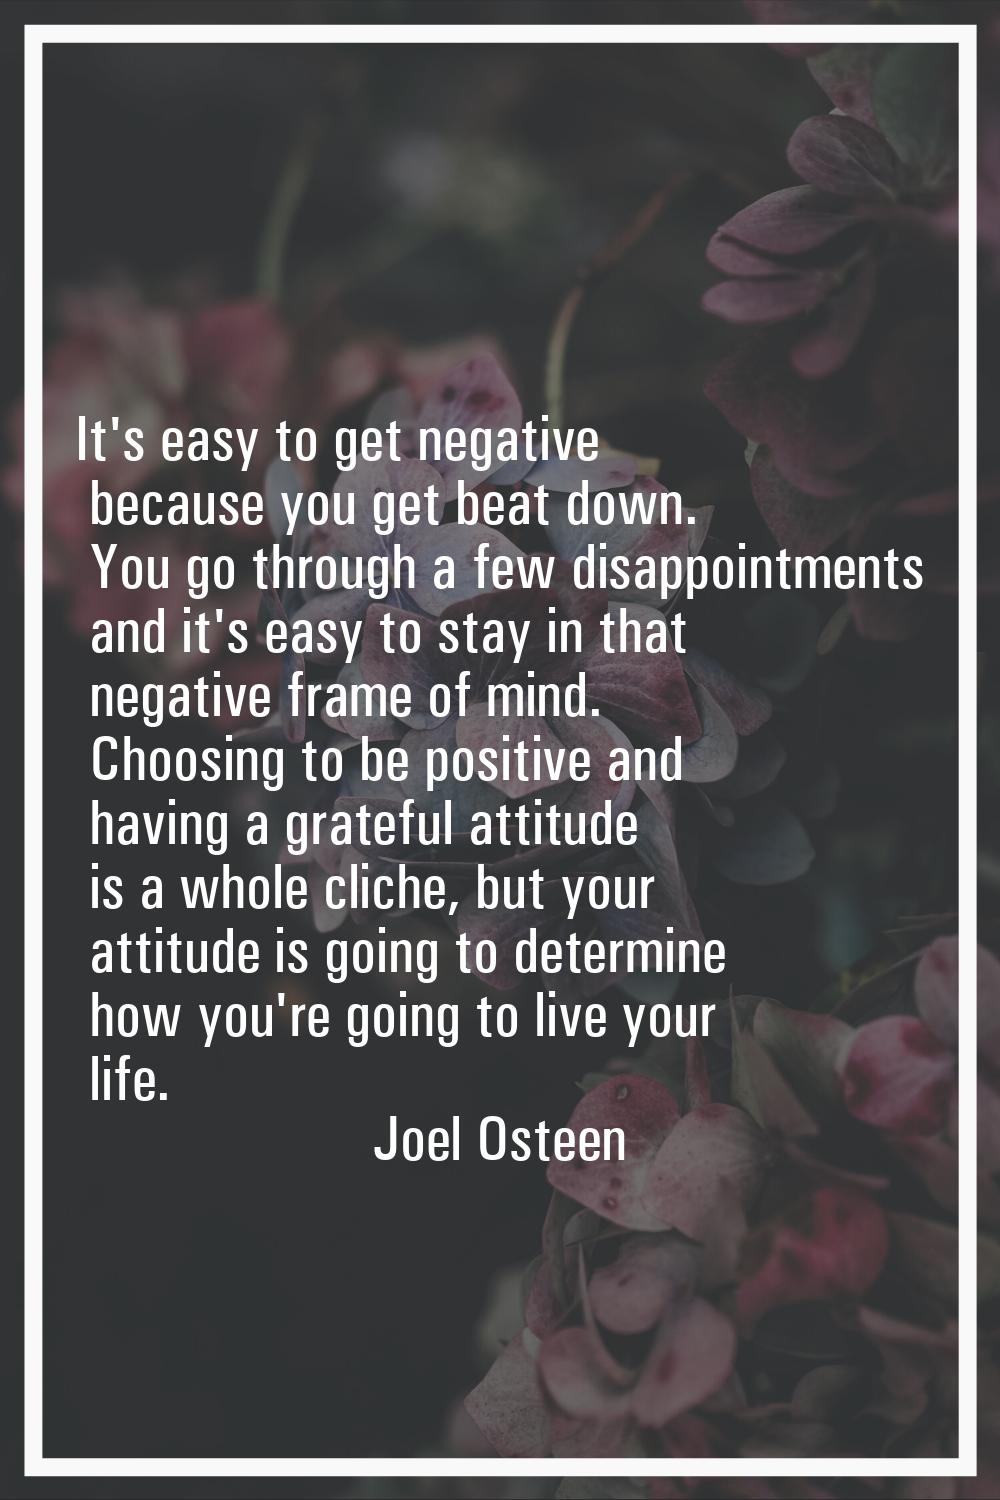 It's easy to get negative because you get beat down. You go through a few disappointments and it's 